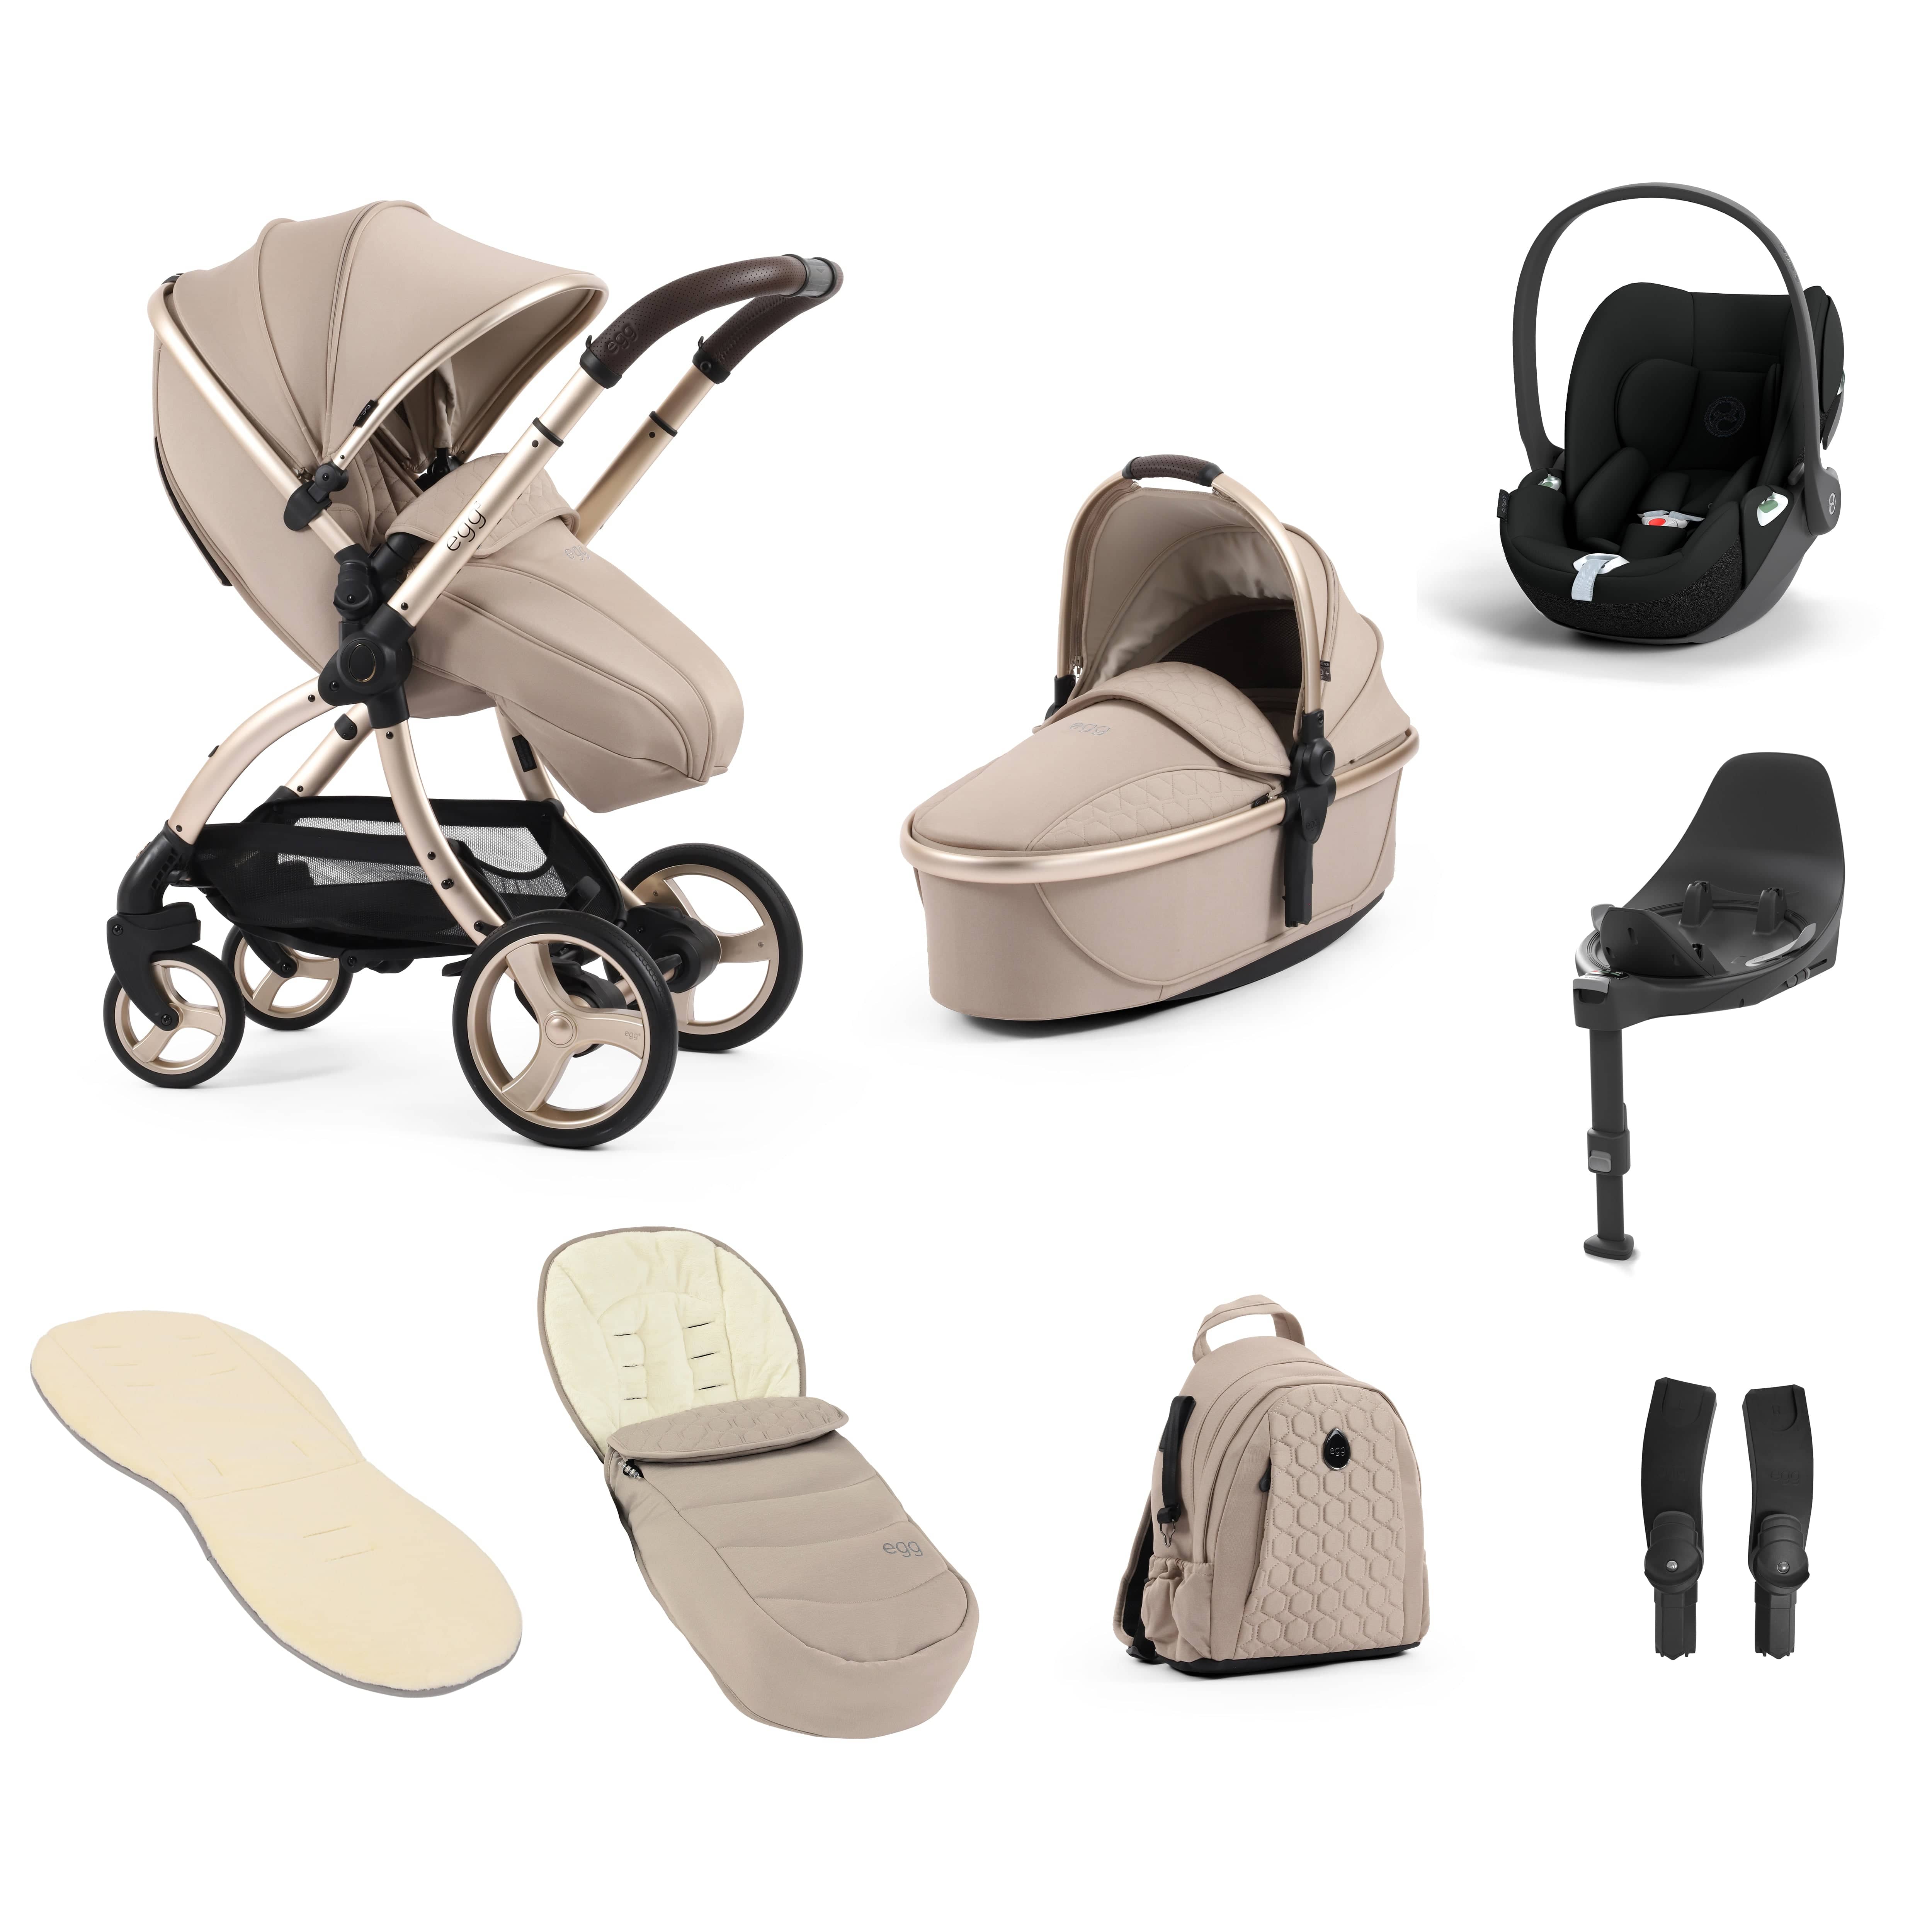 egg3 Luxury Travel System Bundle Feather Baby Prams 14707-FTH 5060711567907